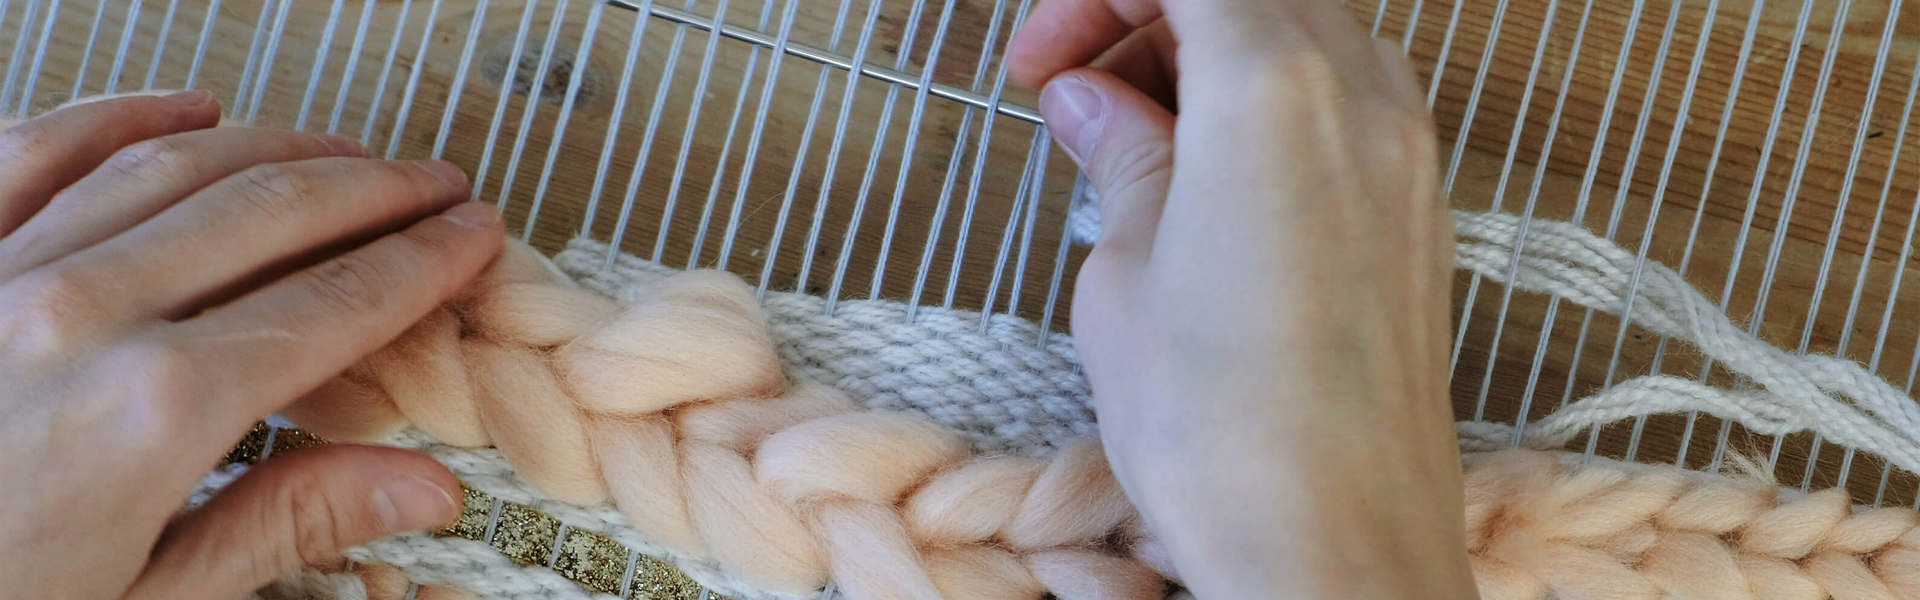 A hand using a loom and yarn needle to weave a yarn piece